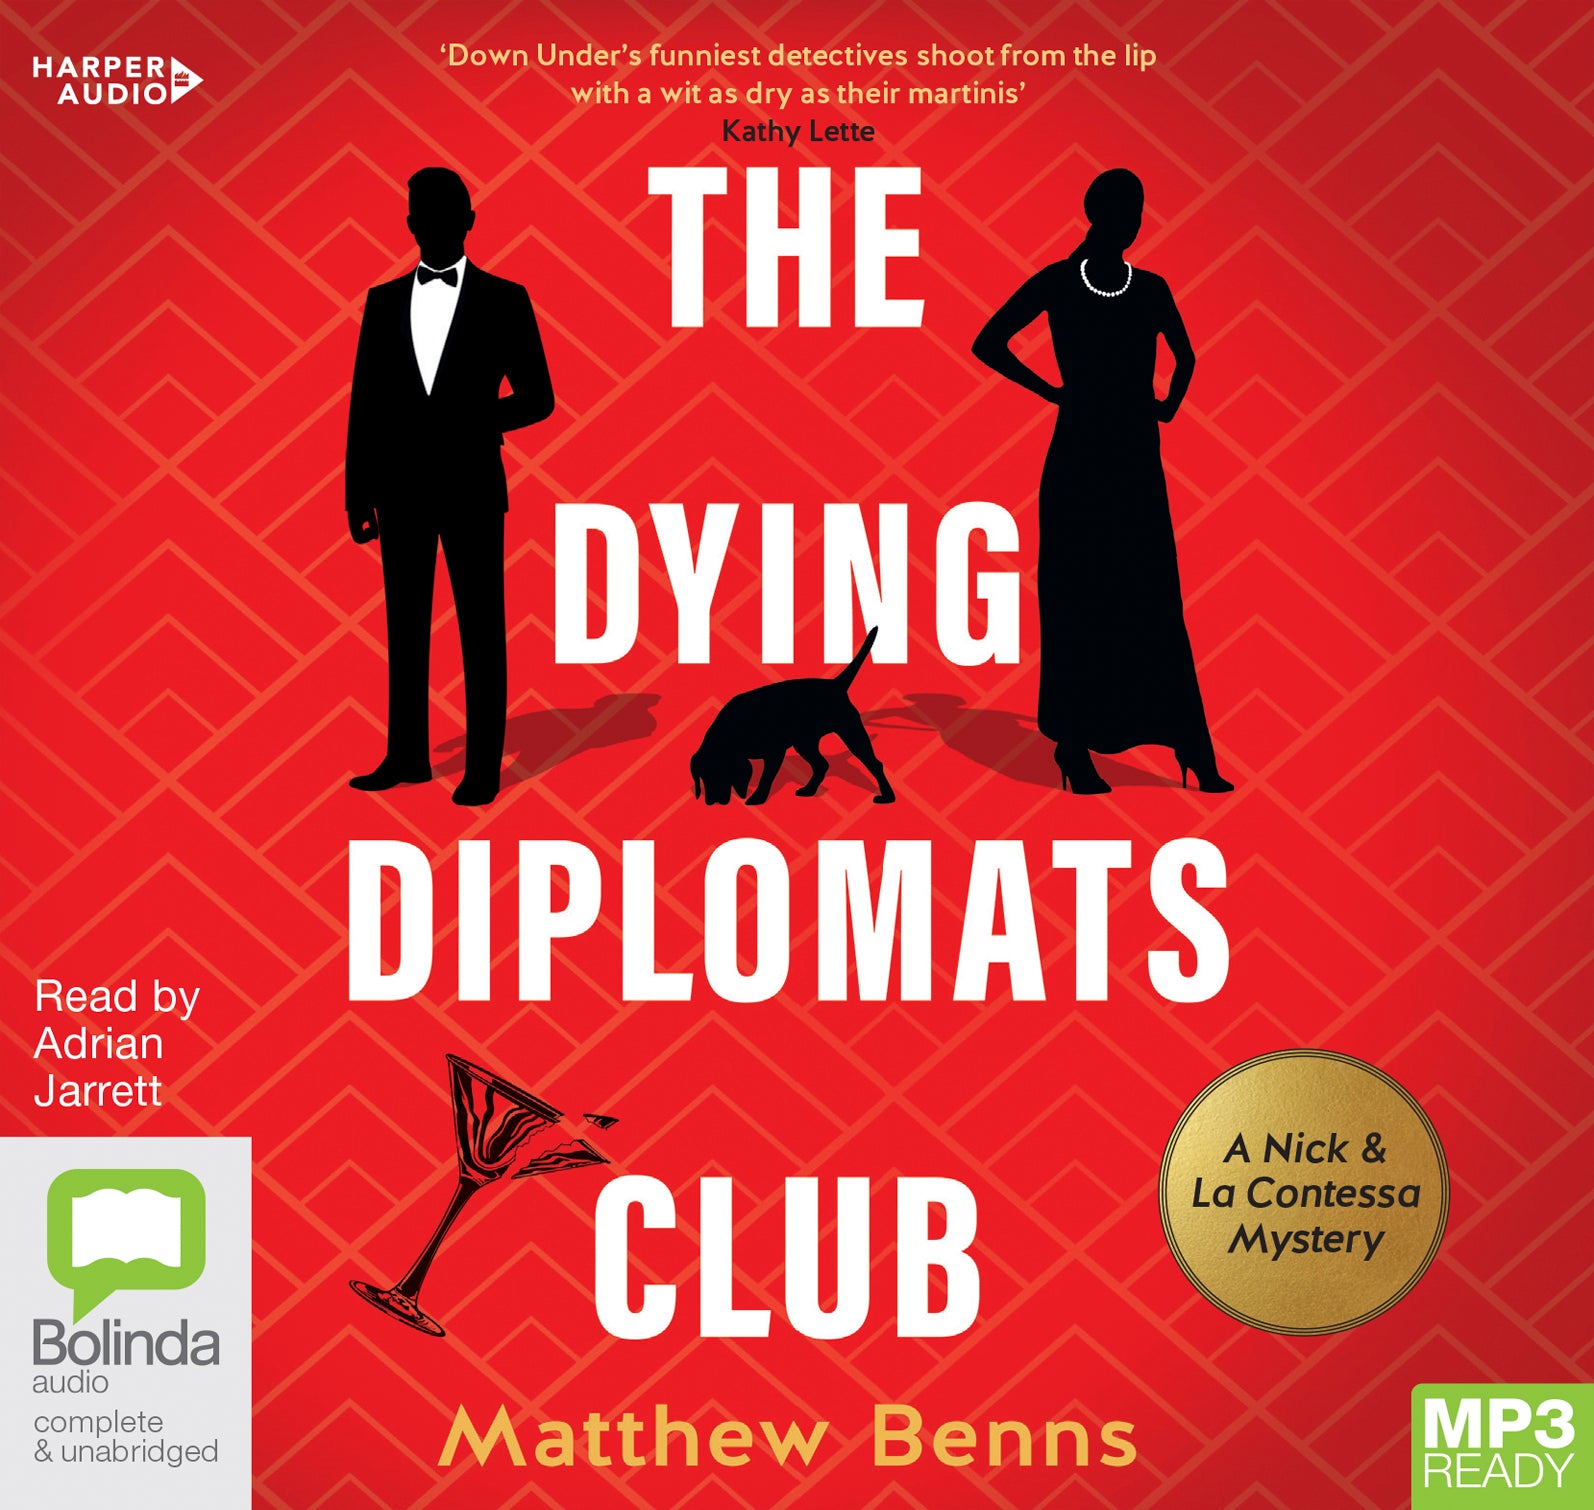 The Dying Diplomats Club  - Unbridged Audio Book on MP3